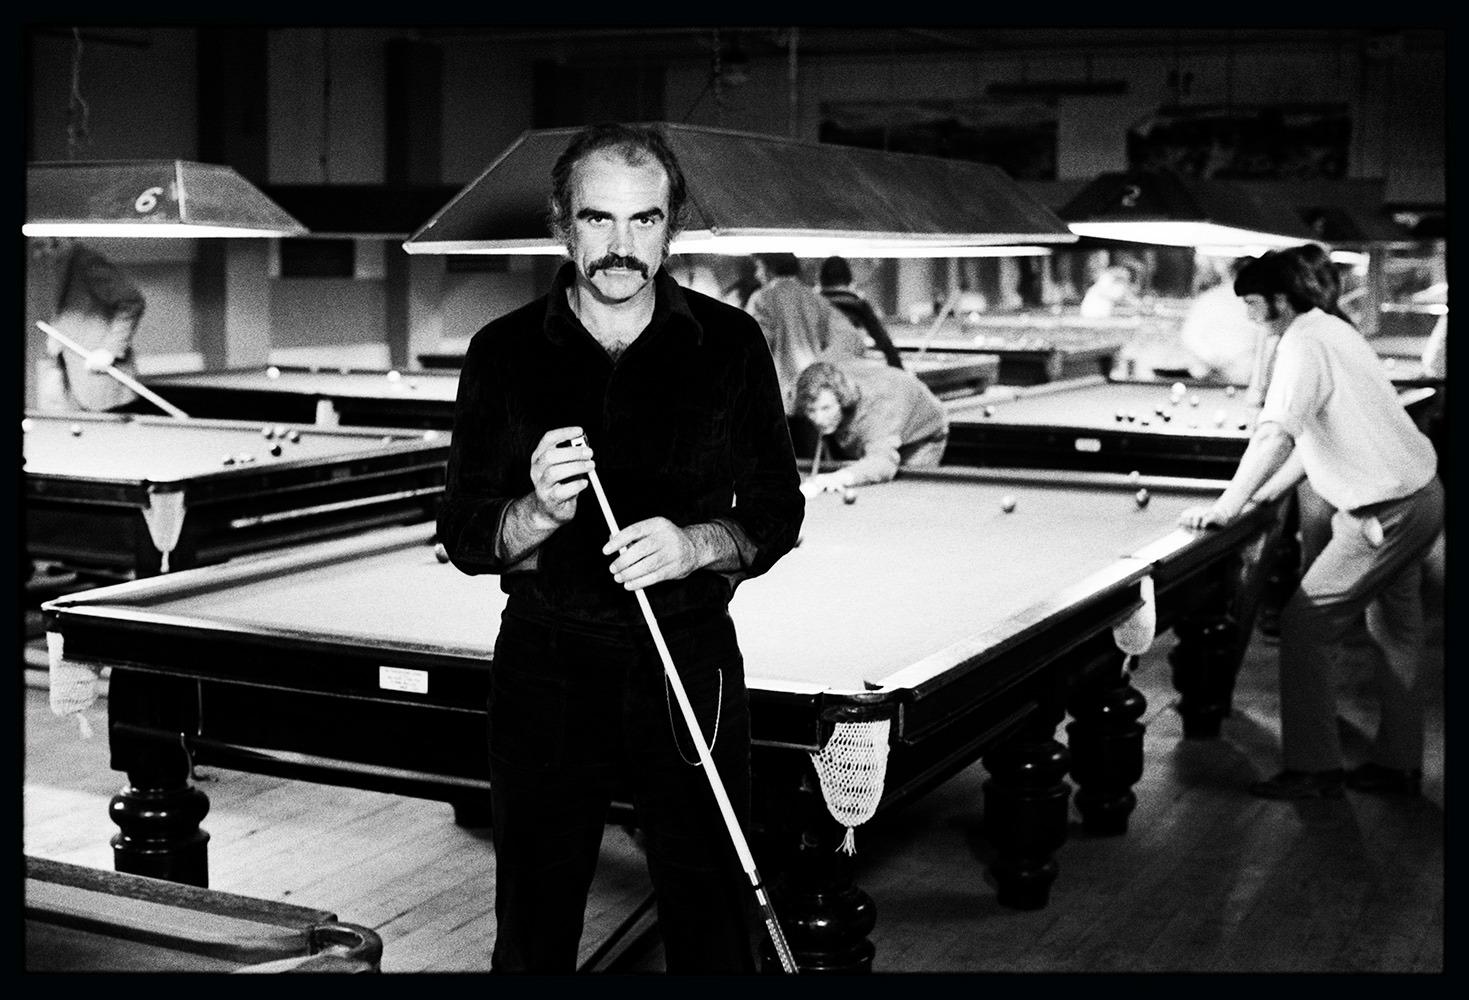 David Steen Black and White Photograph – Sean Connery Snooker - County Wicklow, Irland, 1973 Limitierter Nachlassdruck 